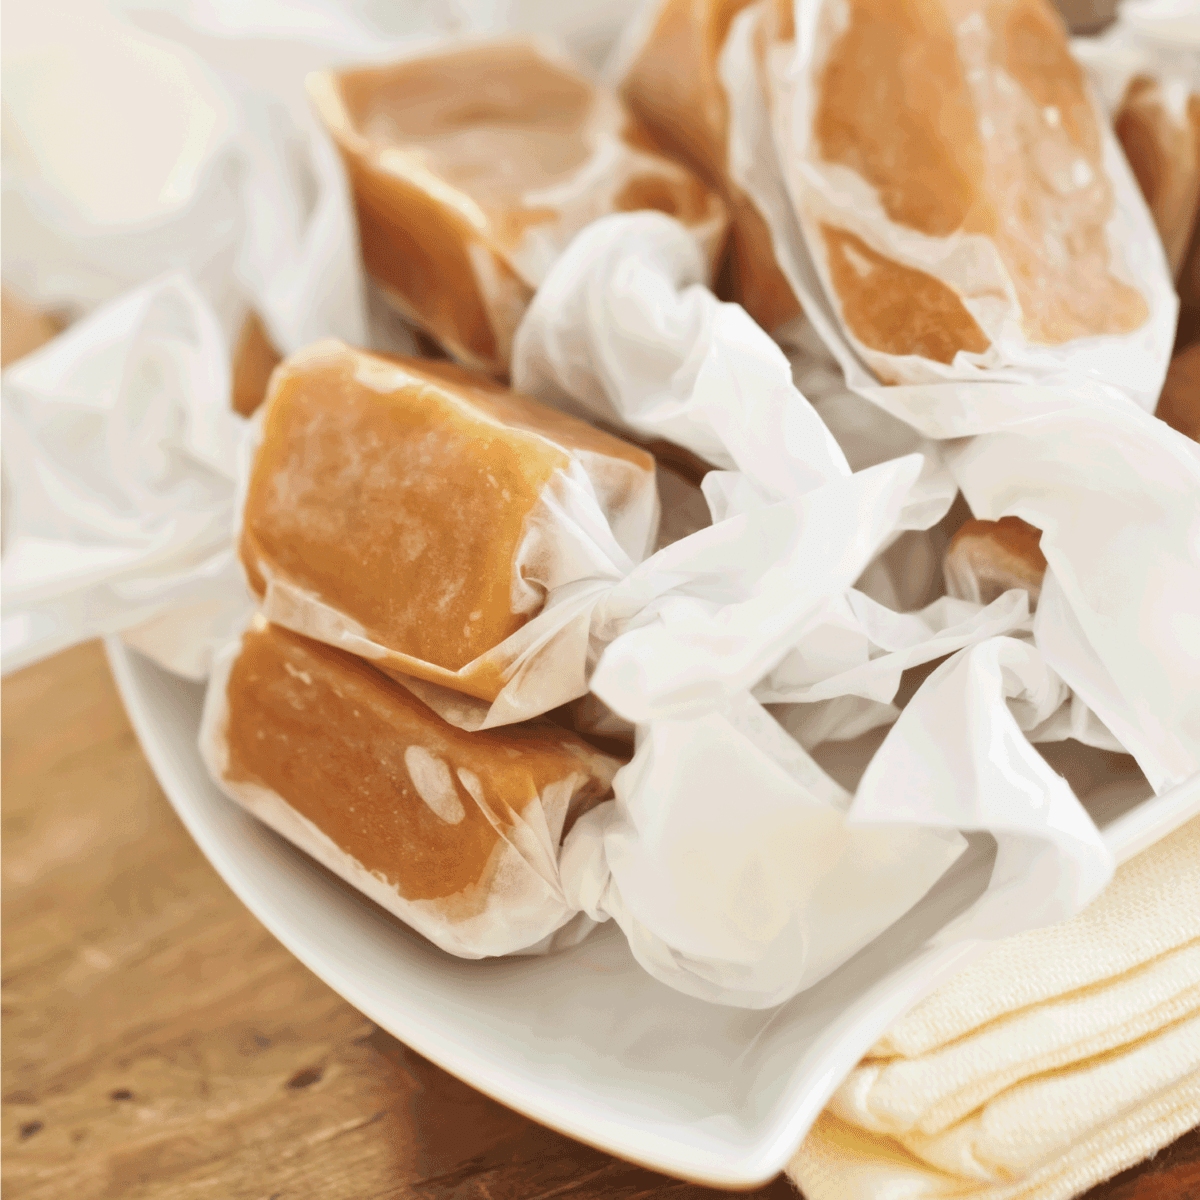 Individually Wrapped Caramel Candies